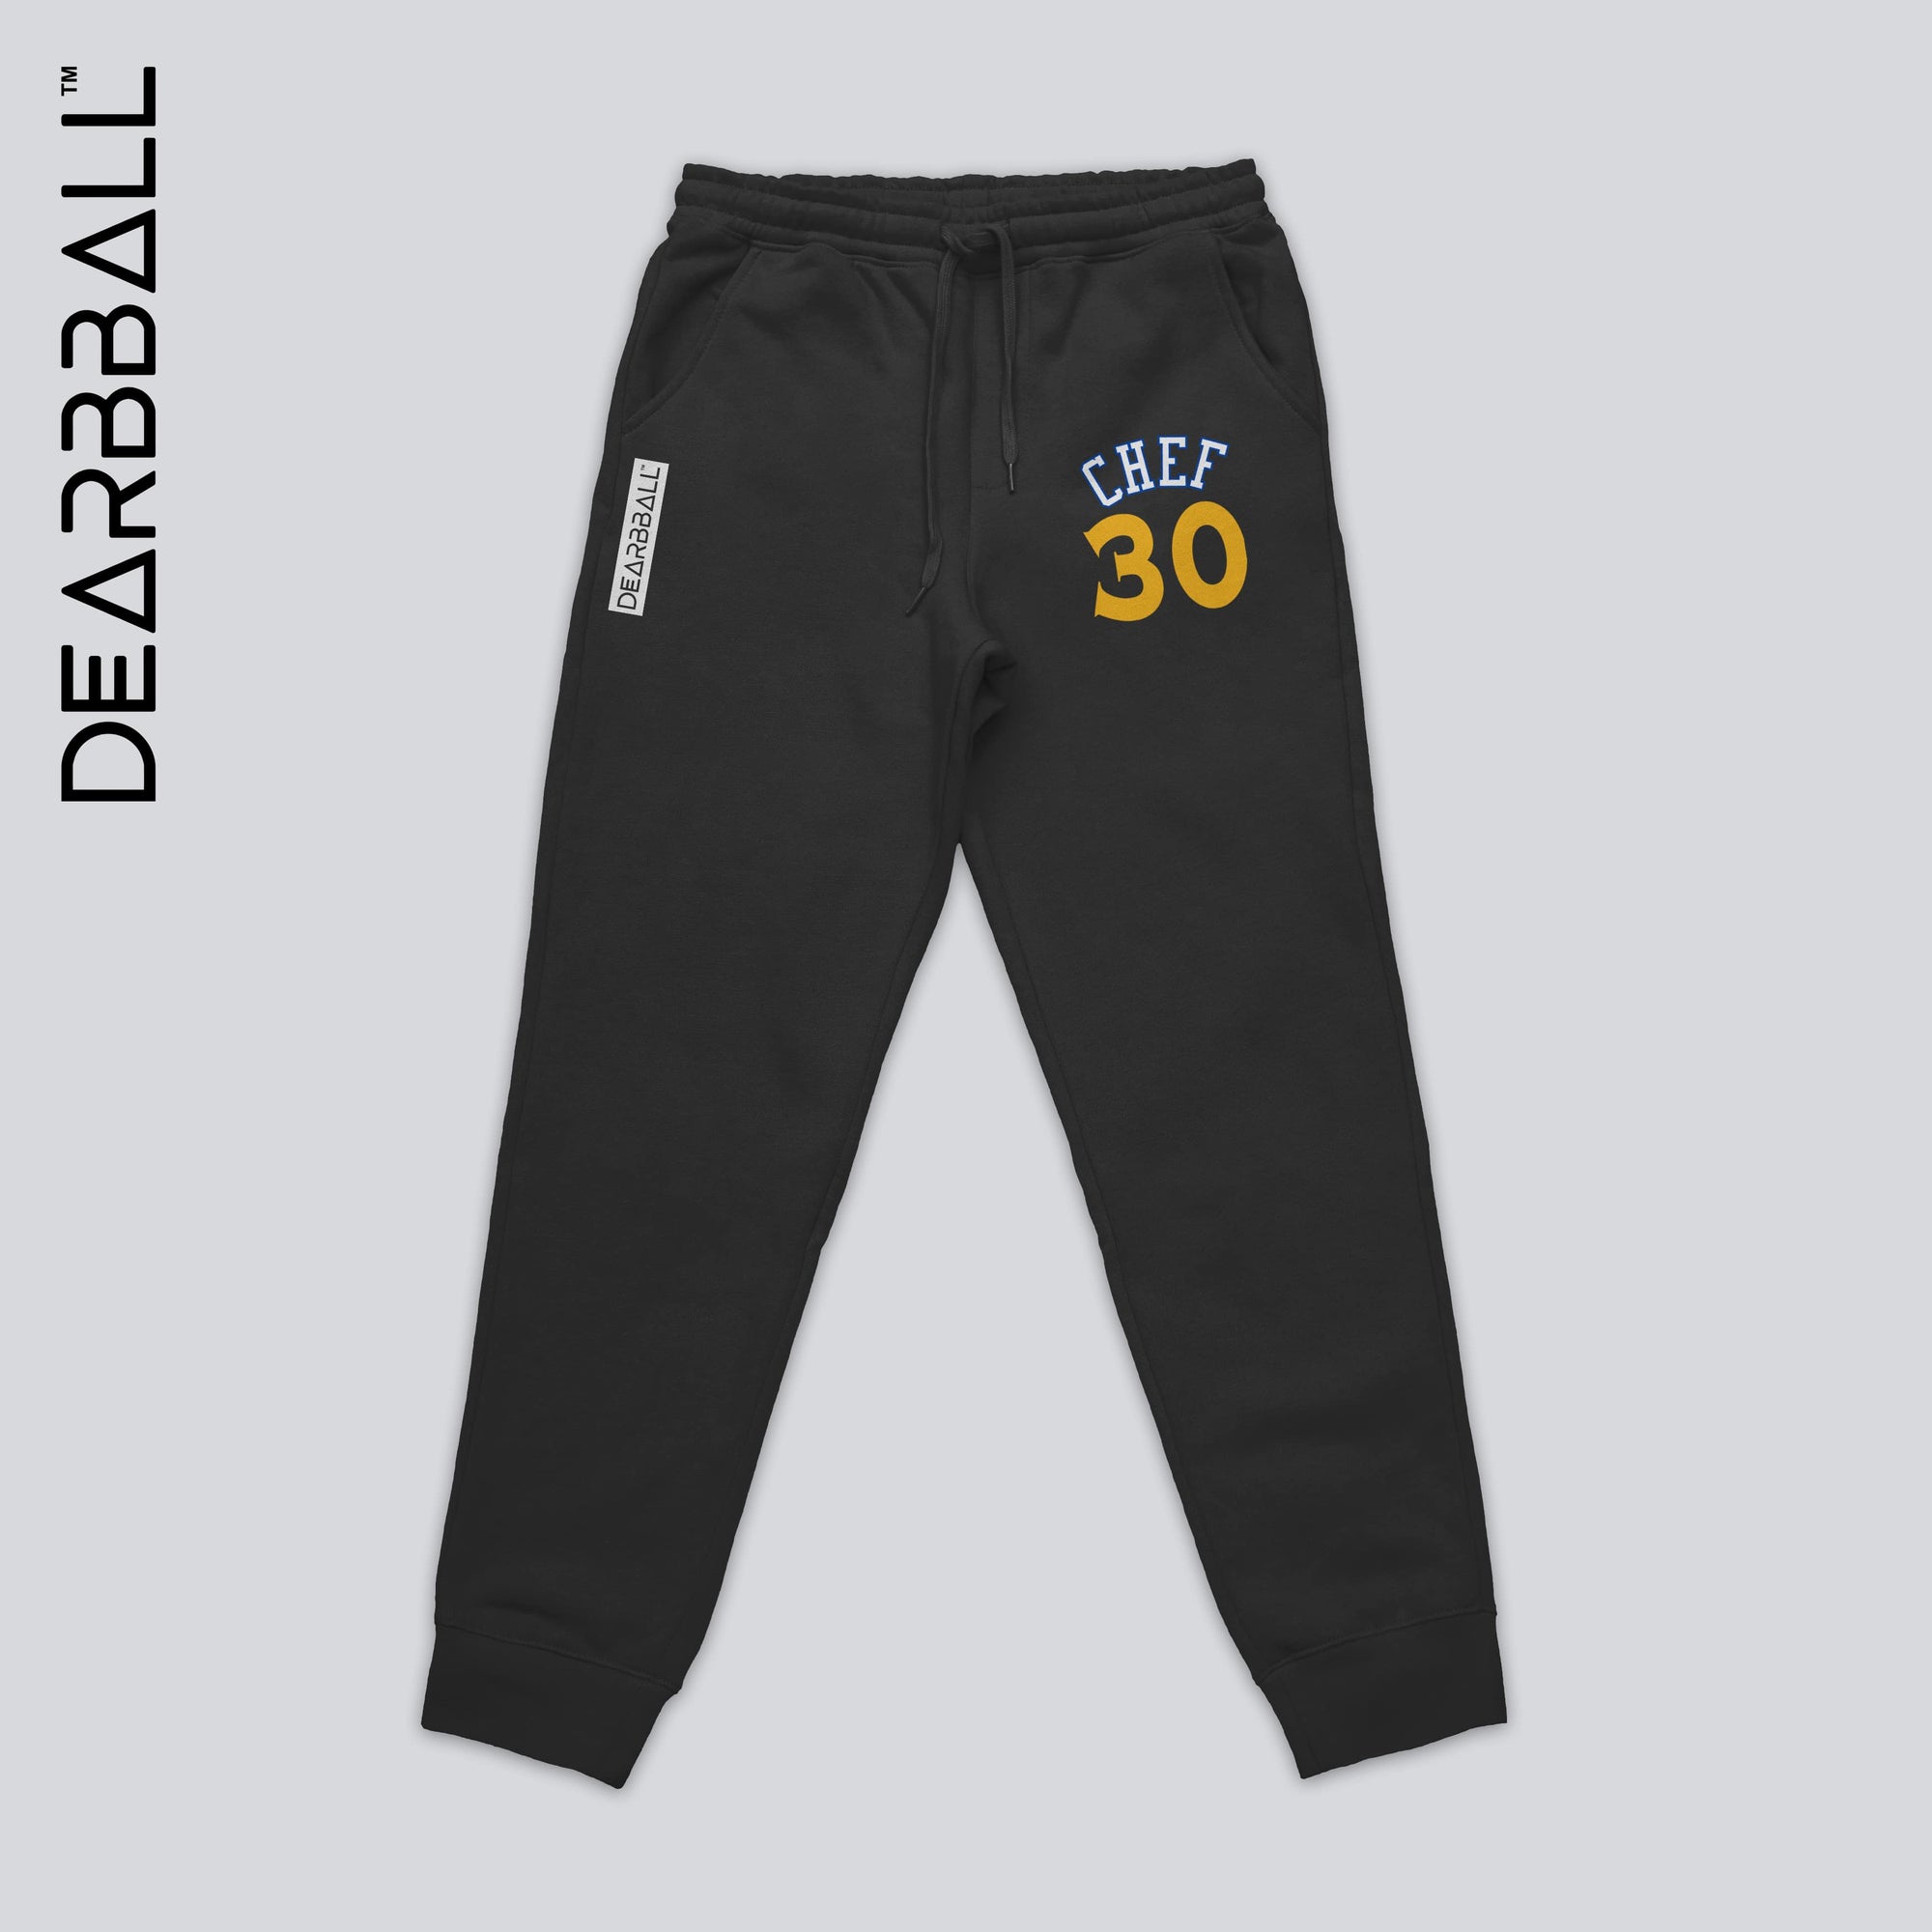 Jogging-Stephen-Curry-Golden-State-Warriors-Dearbball-vetements-marque-france